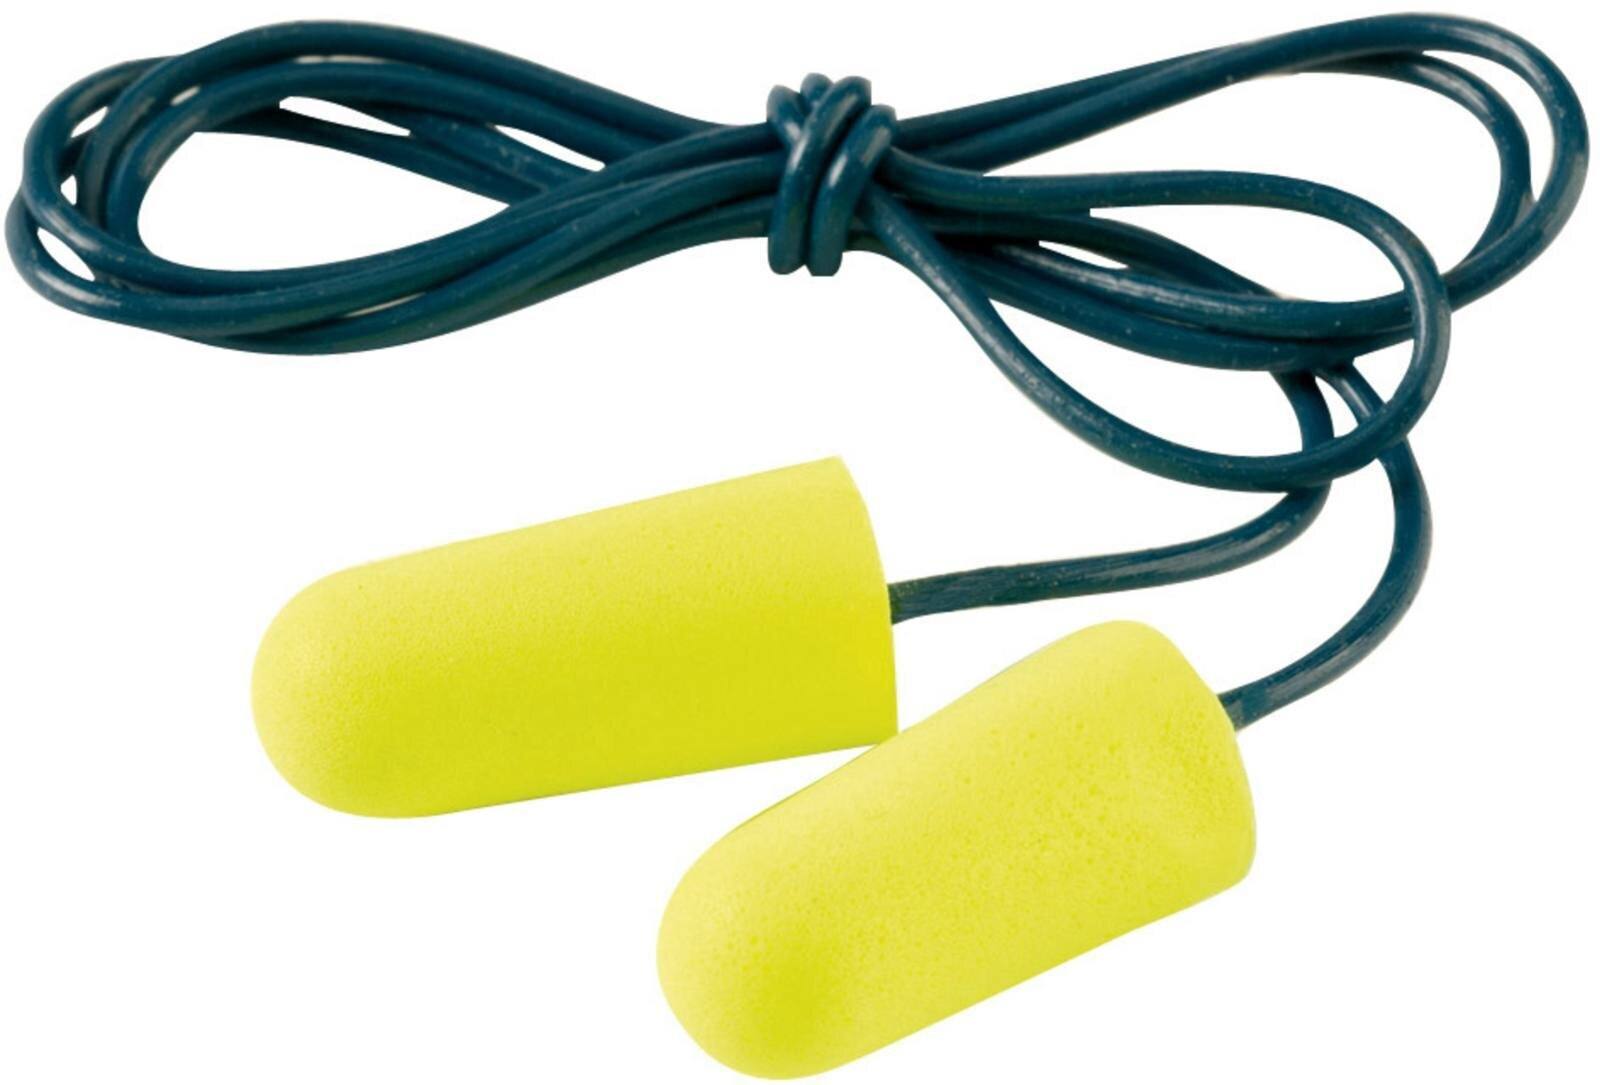 3M E-A-R Soft Yellow Neons, with cord, polyurethane, flexible and comfortable, in pairs in polybag, neon yellow, SNR=36 dB, ES01005